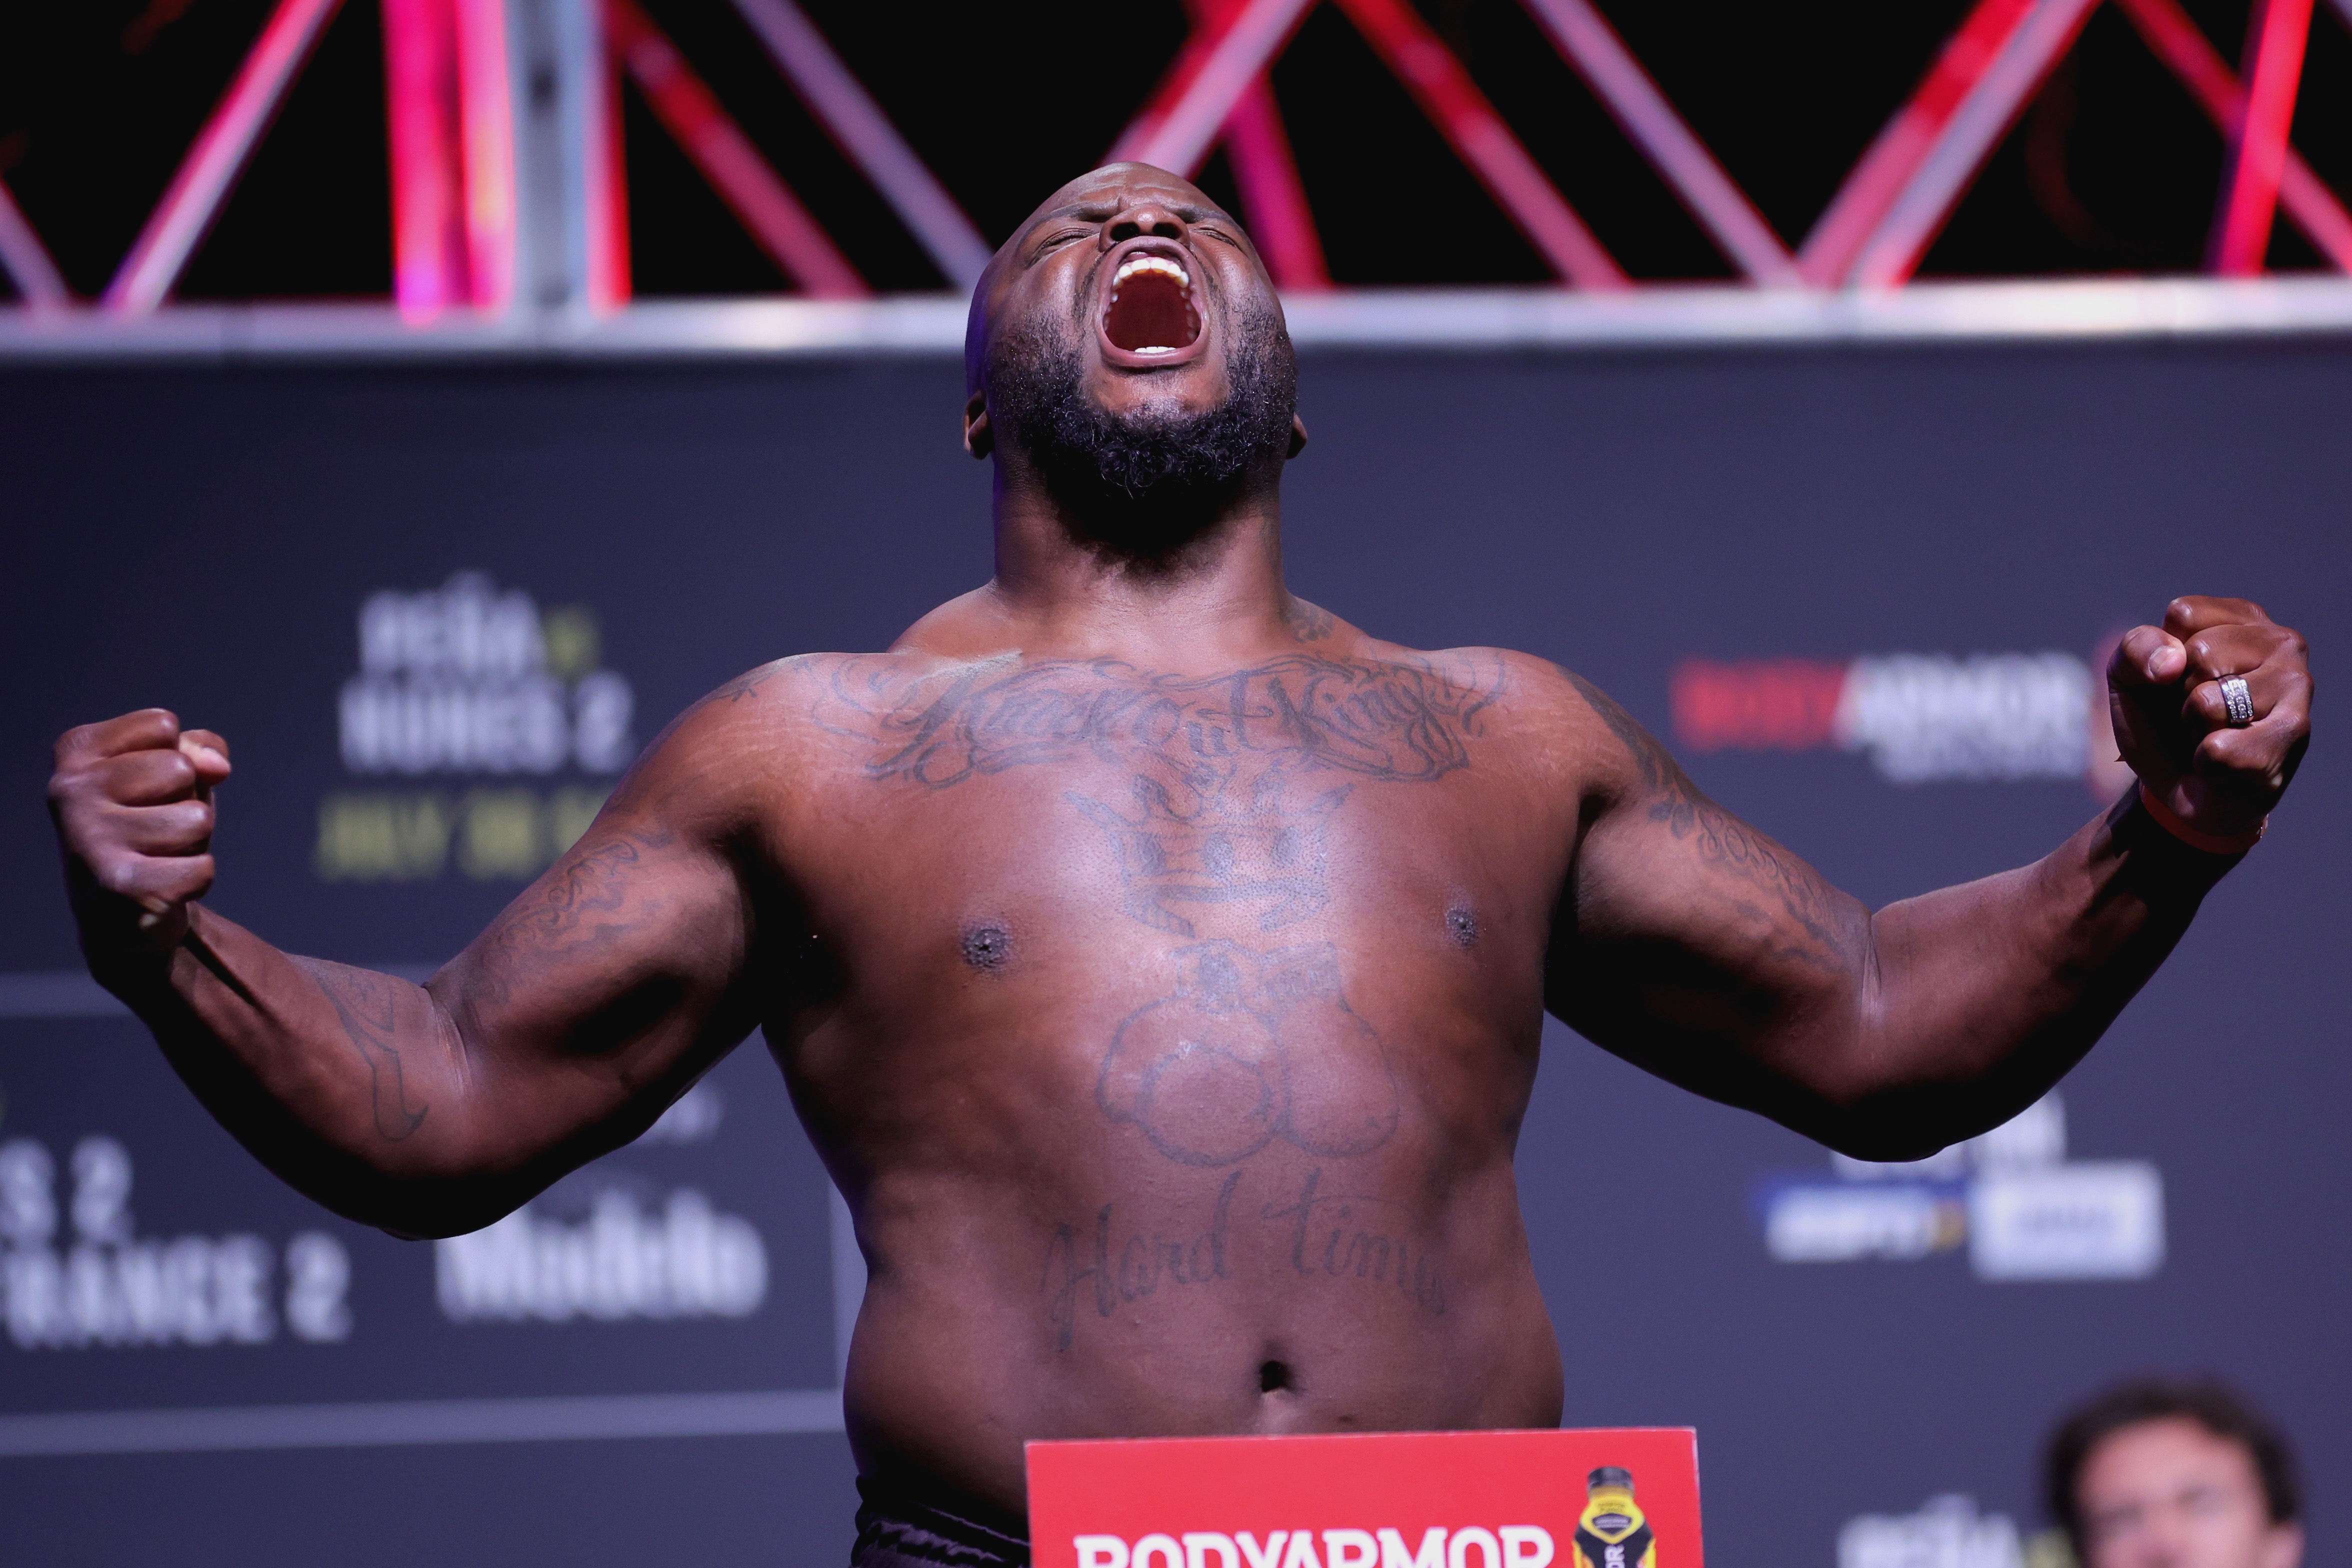 Derrick Lewis poses on the scale during the UFC 277 ceremonial weigh-in at American Airlines Center on July 29, 2022 in Dallas, Texas.